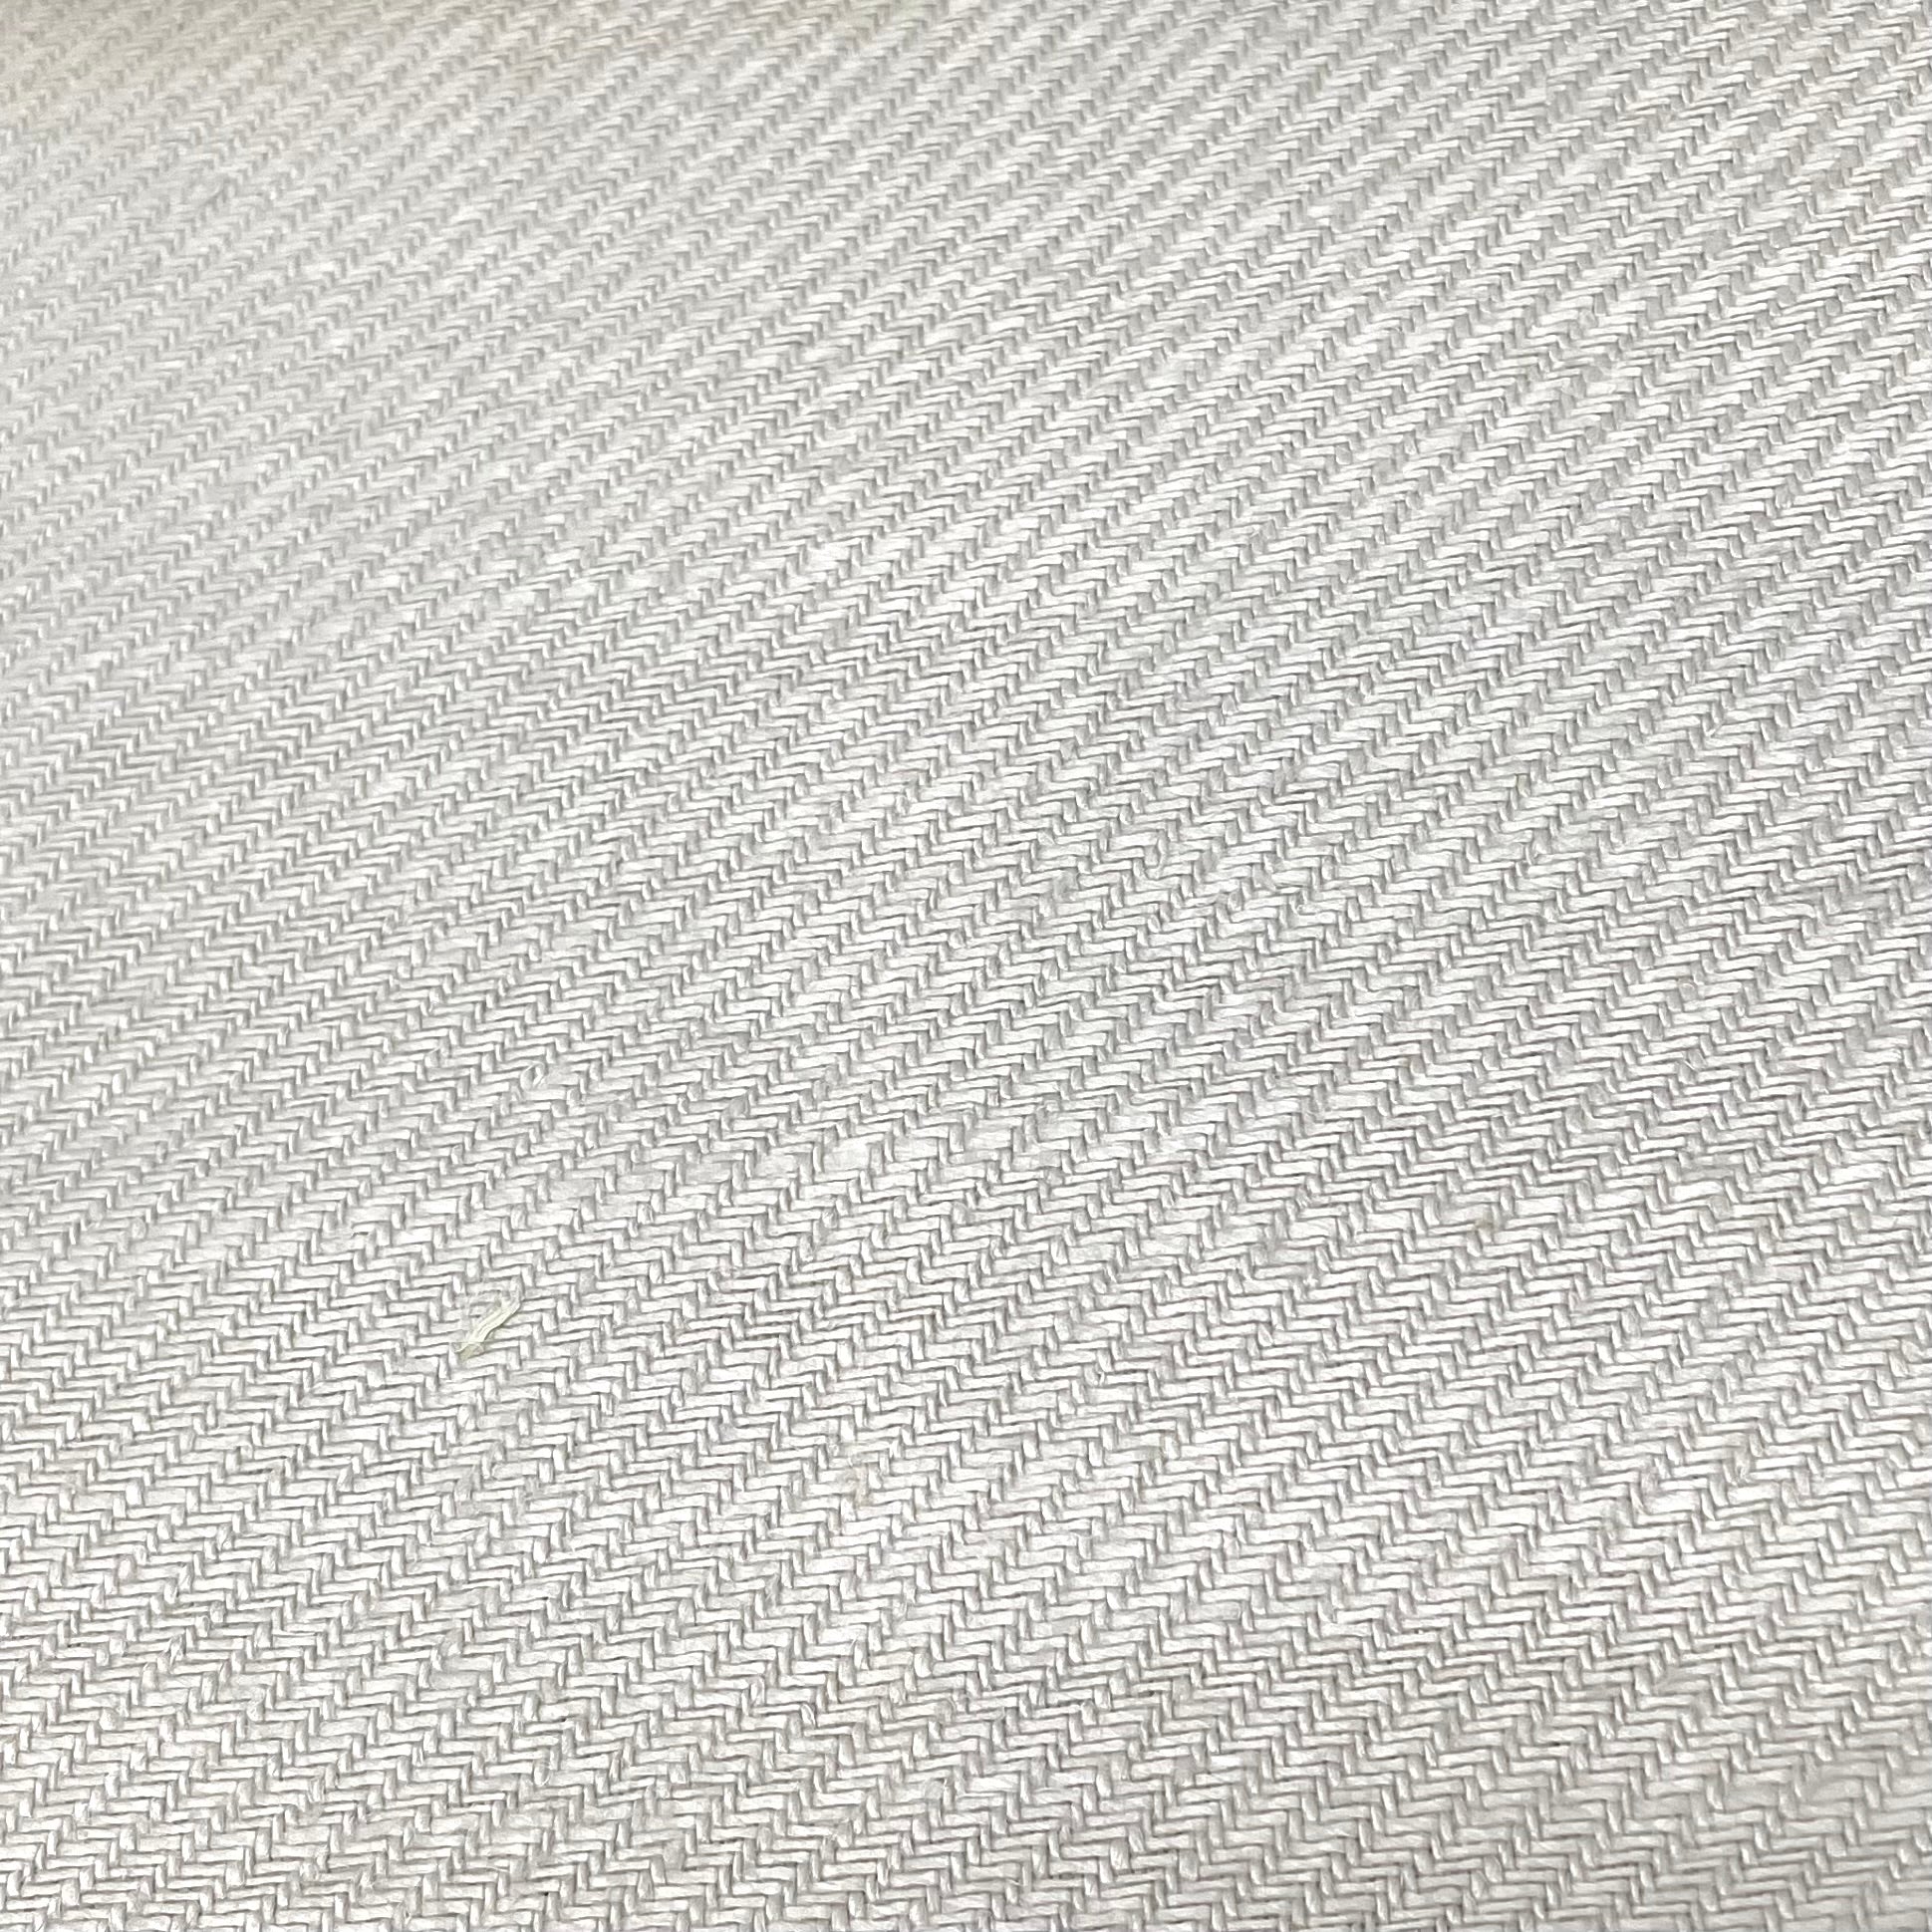 Diagonal 100% Natural Linen Fabric By The Yard, Curtain, Drapery, Table Top, 54" Width/CL1074